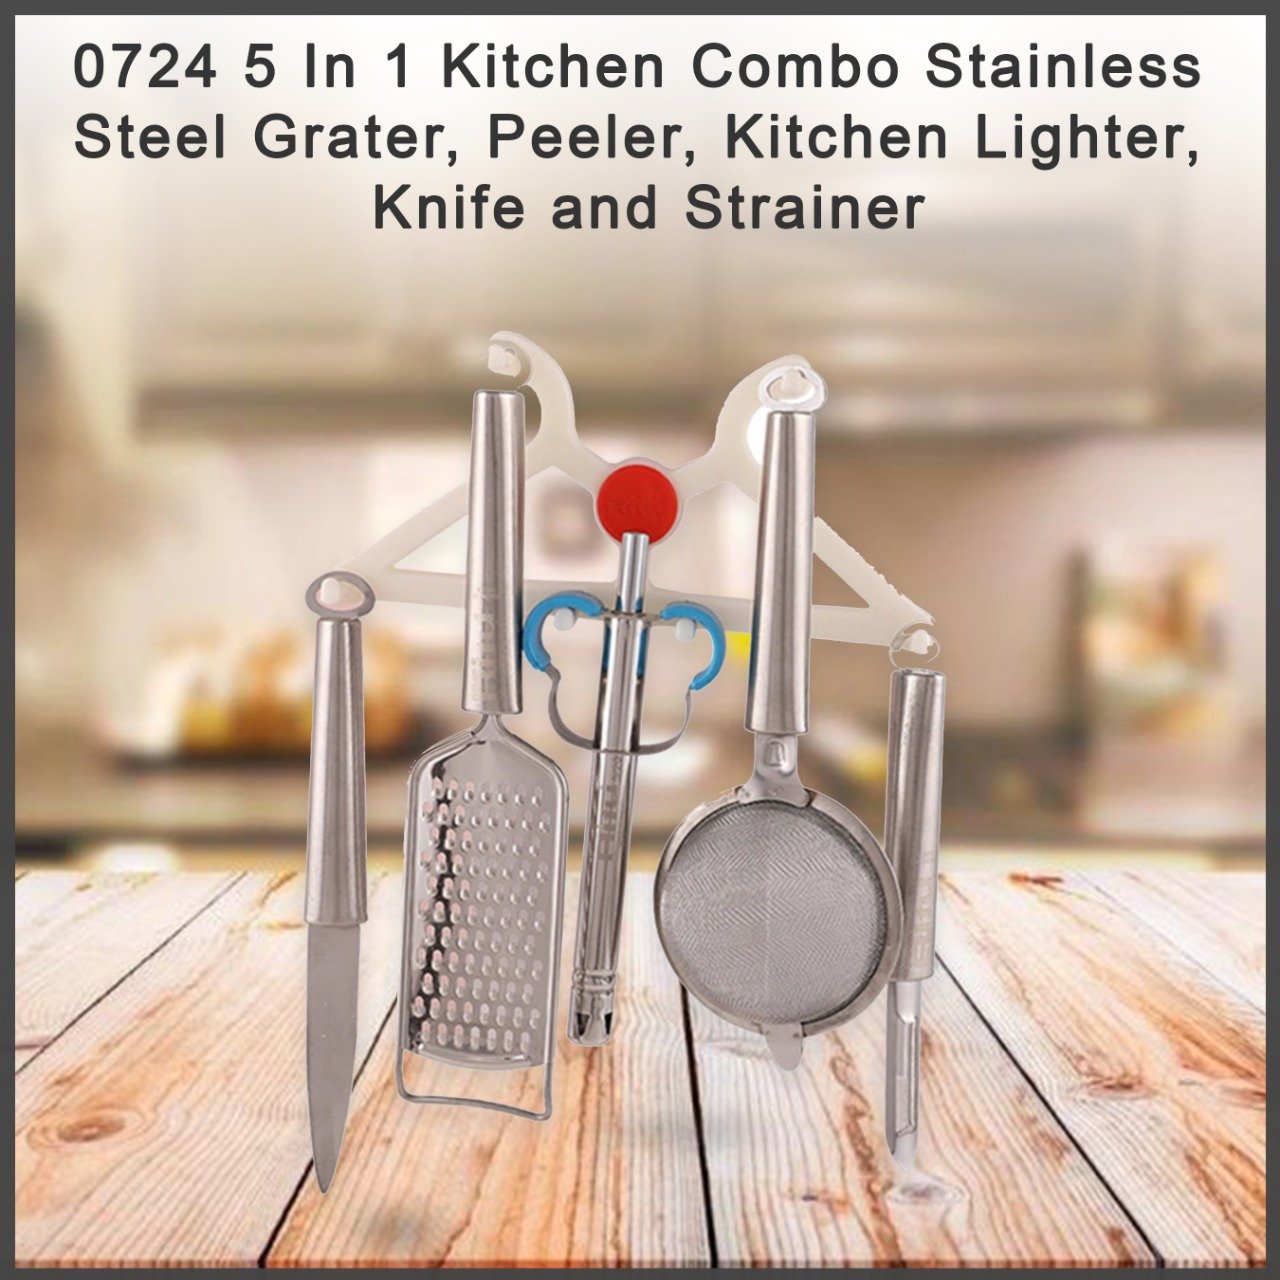 0724 5 in 1 kitchen combo stainless steel grater peeler kitchen lighter knife and strainer